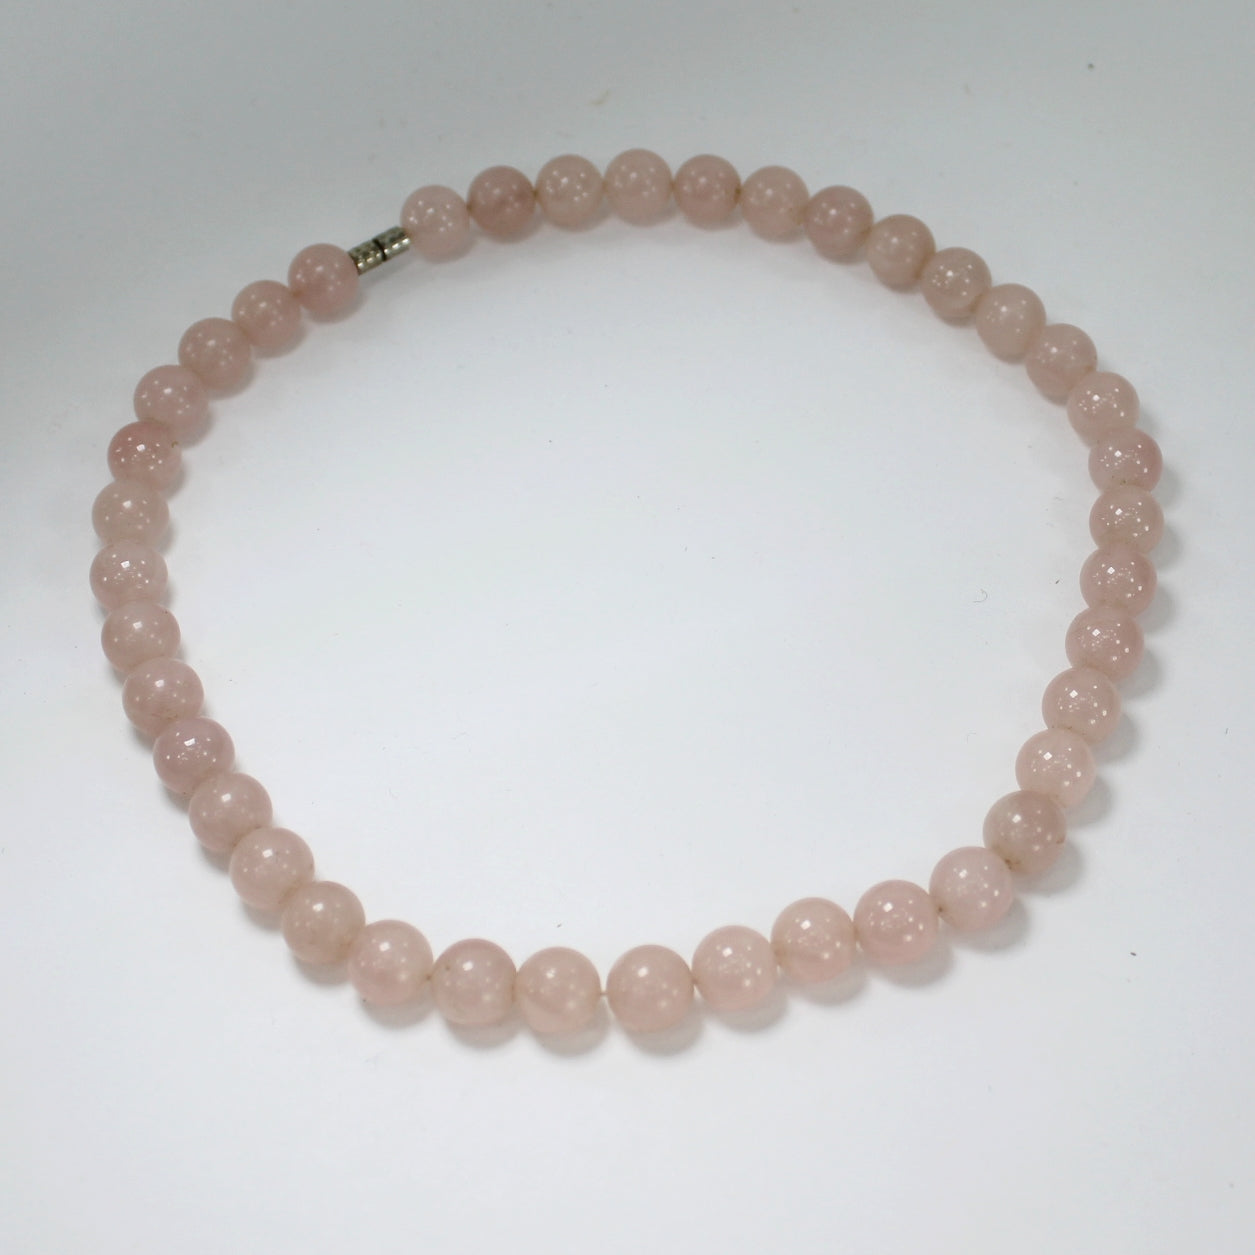 Lovely Natural Rose Quartz Necklace Egypt Round Luminous Pink Perfectl ...